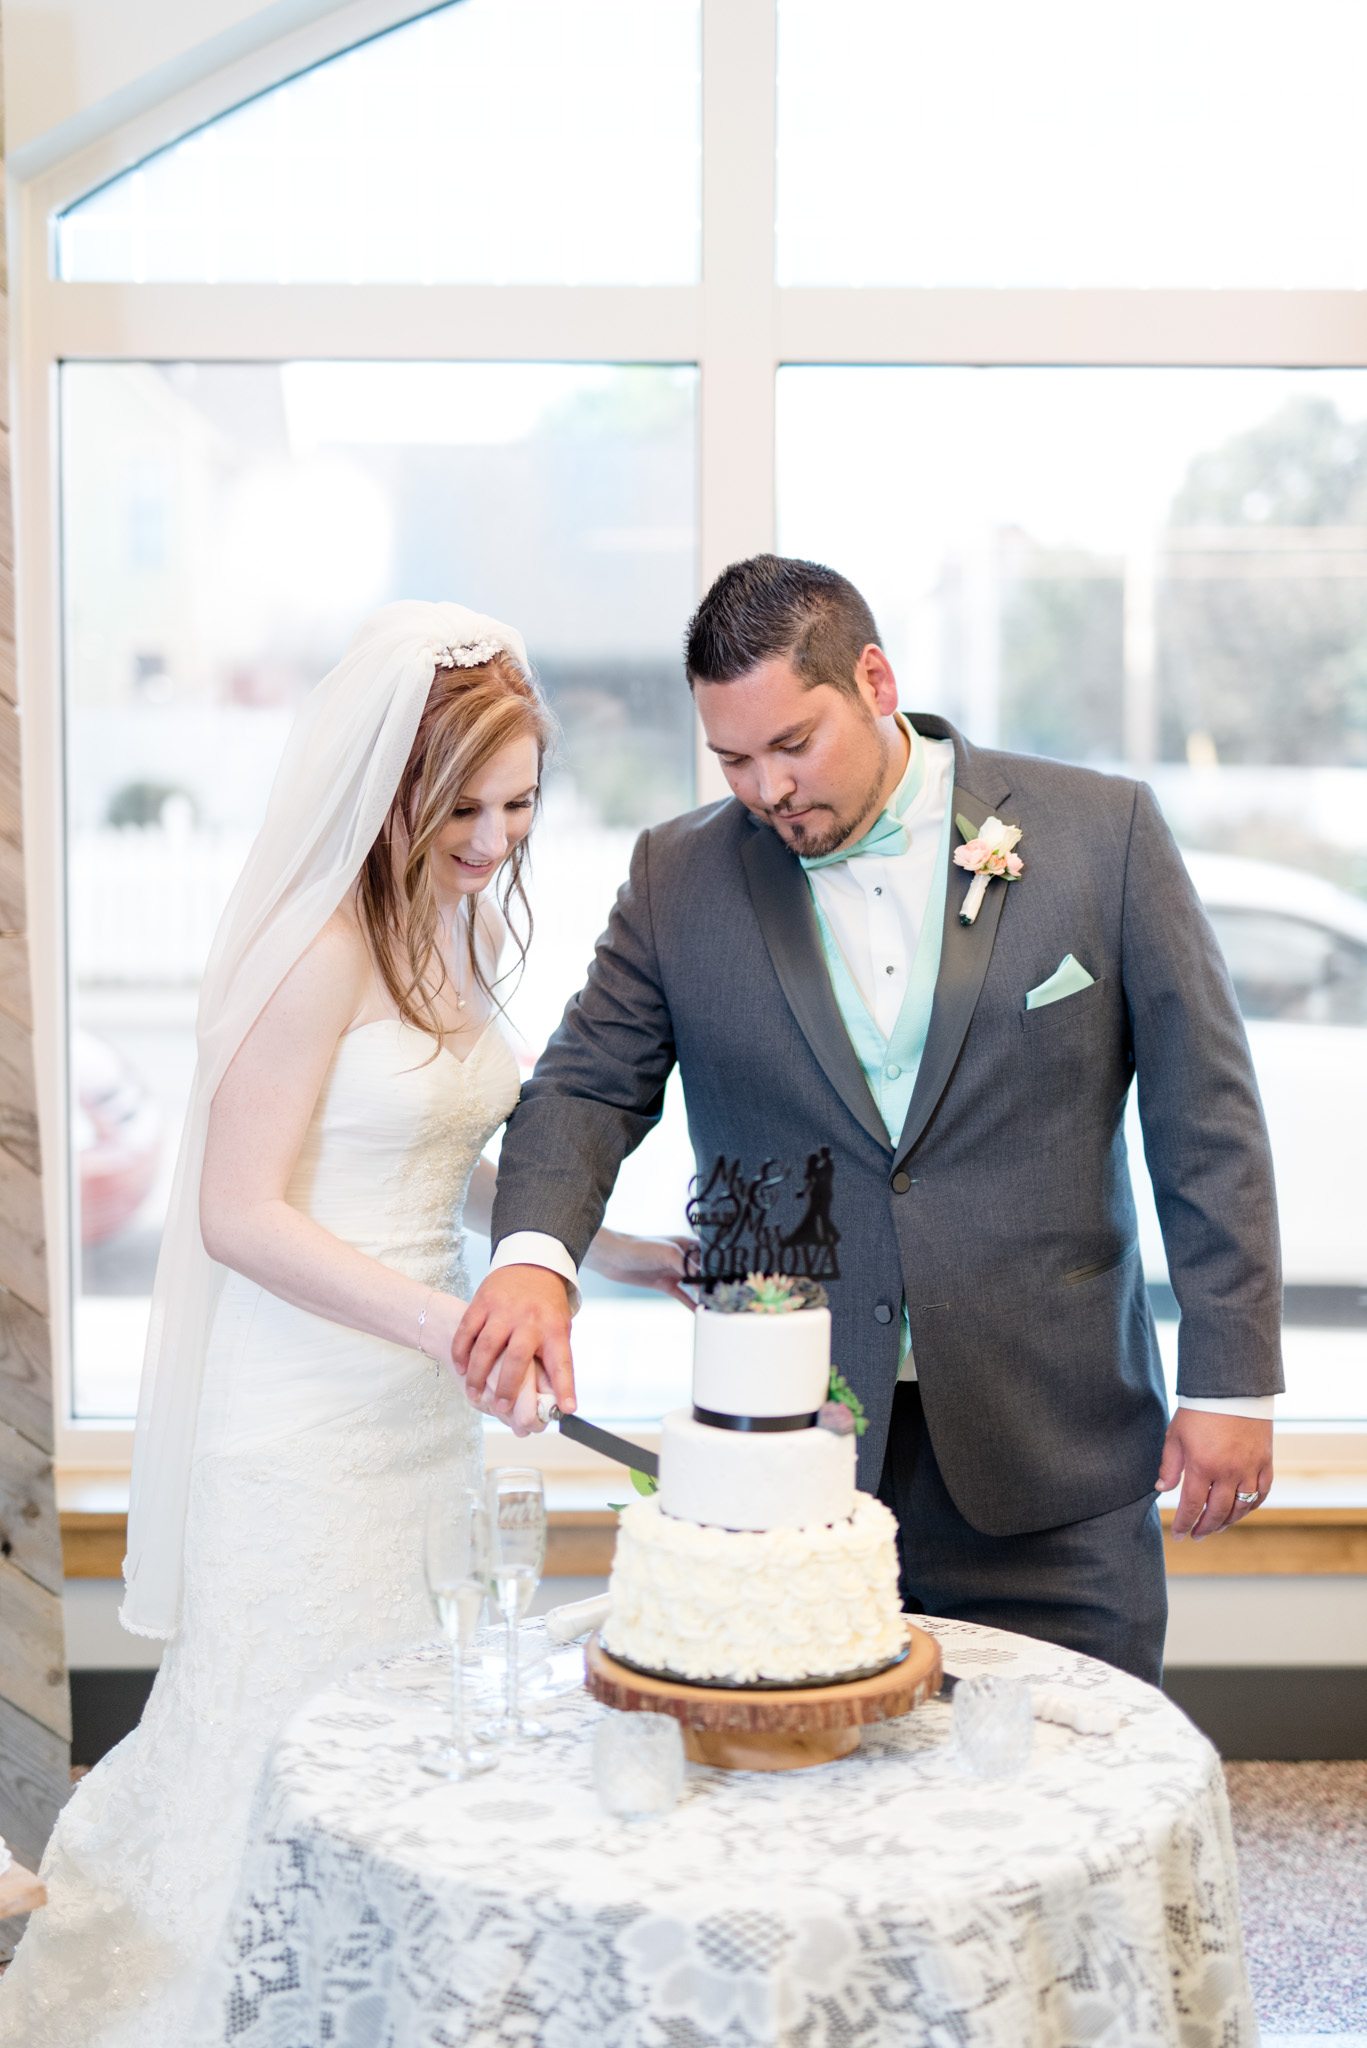 Bride and groom cut the cake at wedding reception.